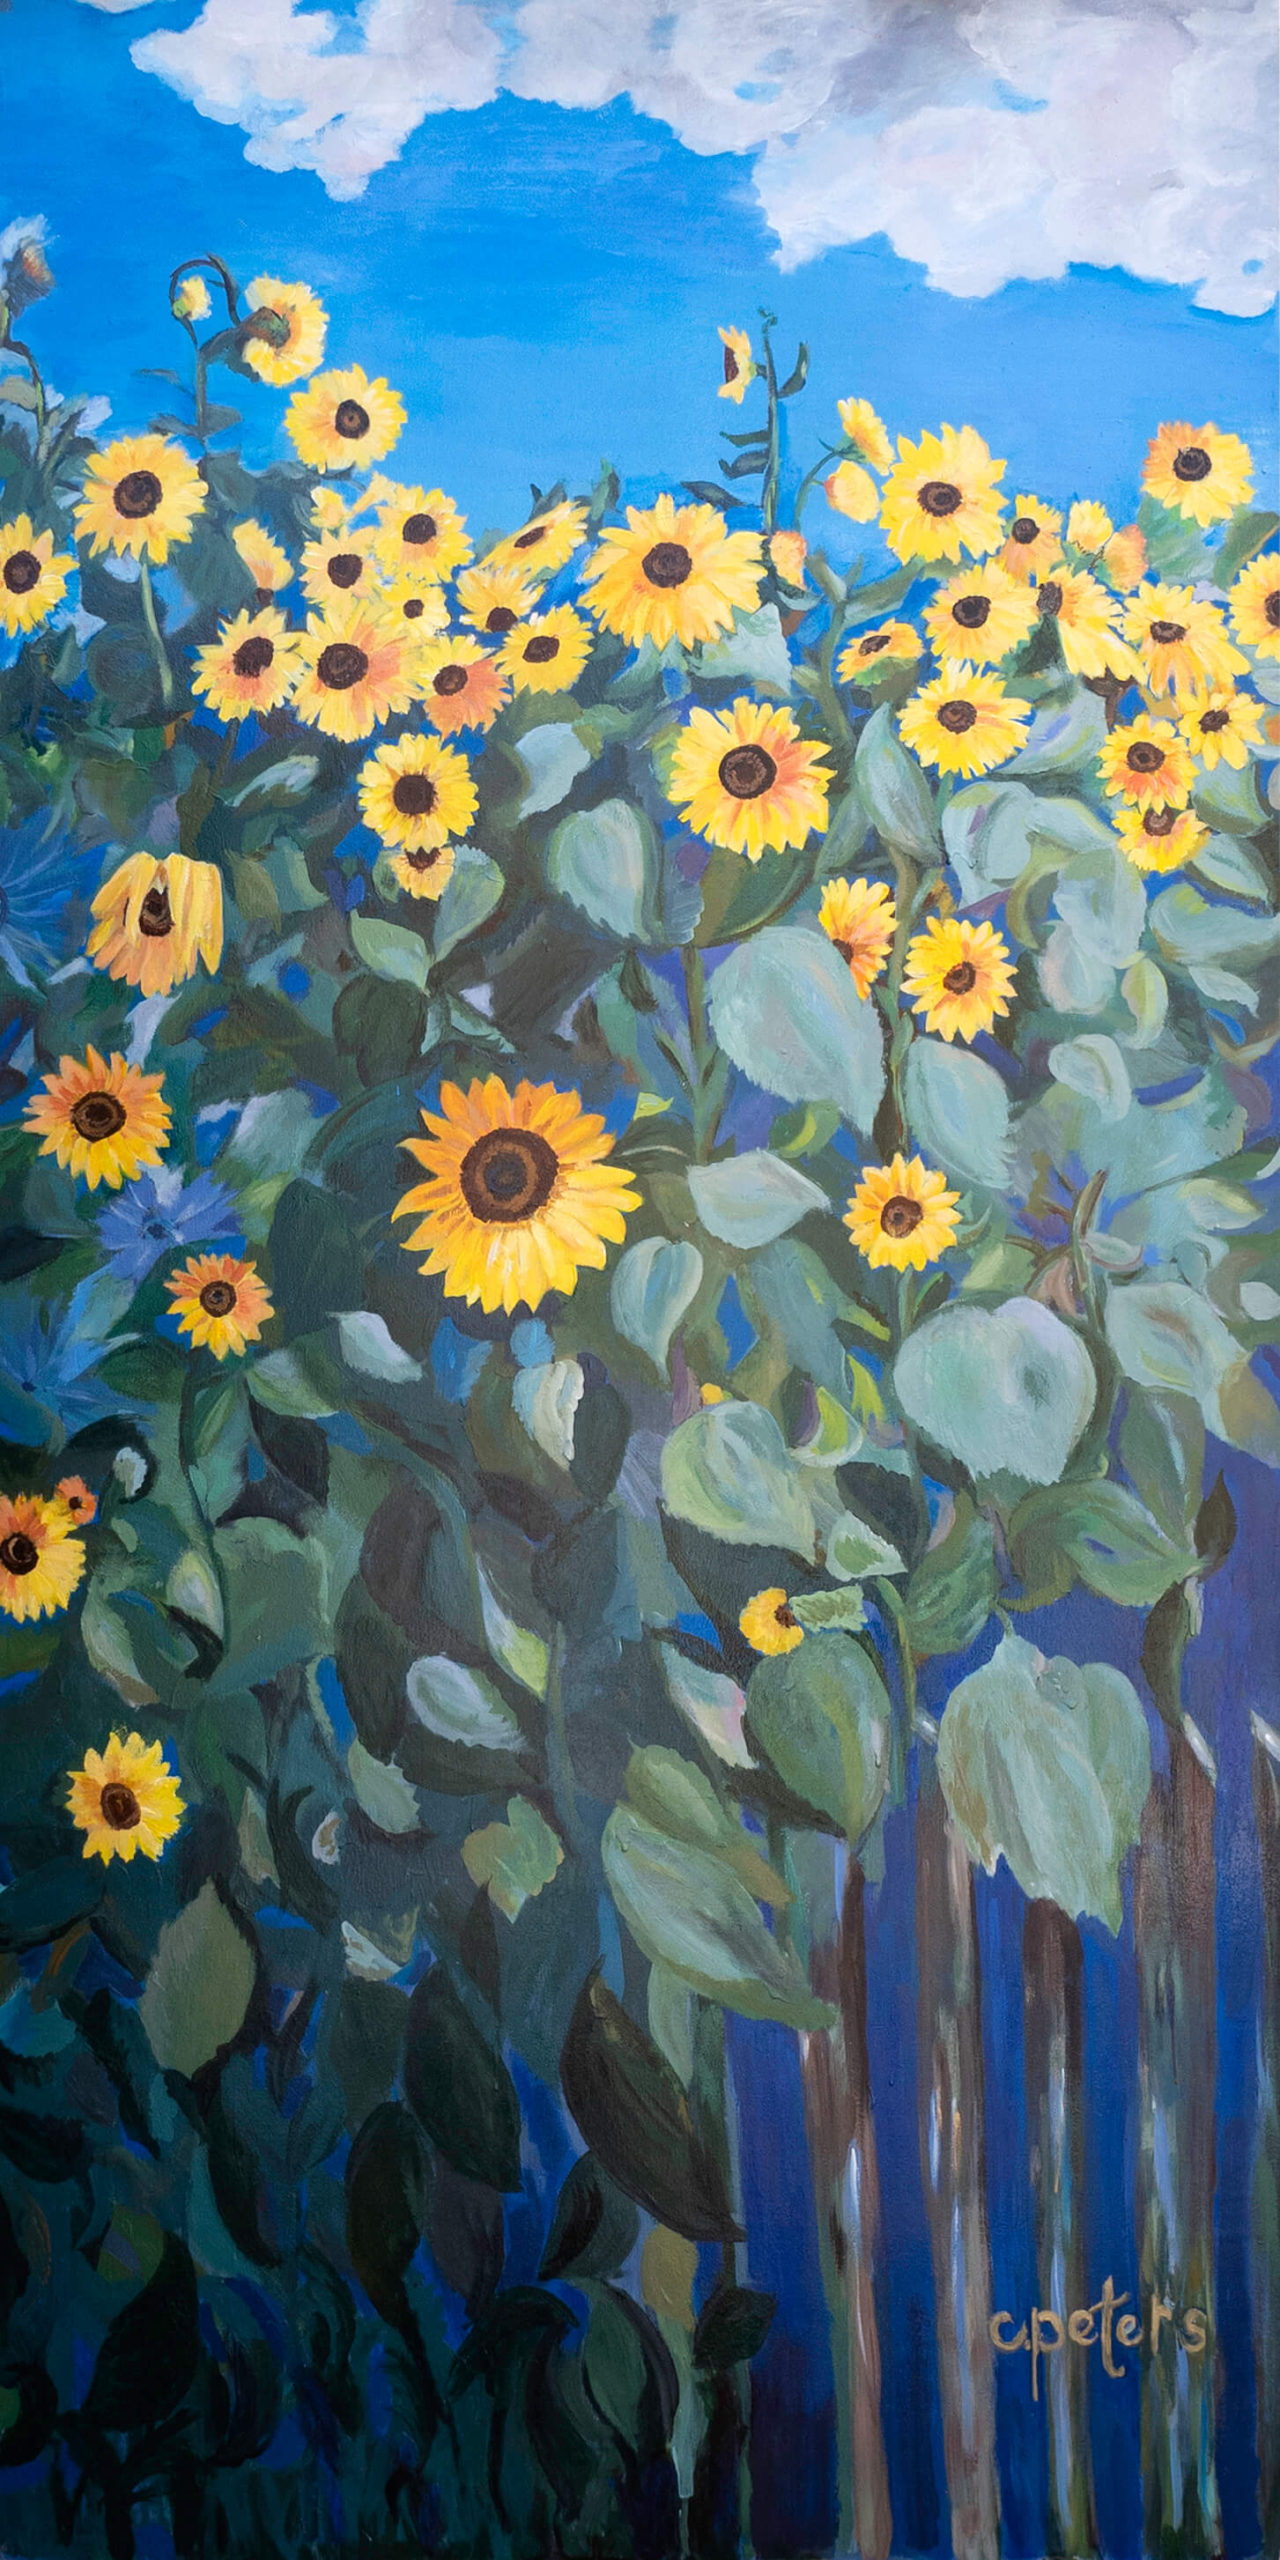 "Sunflowers" by Cindy Peters